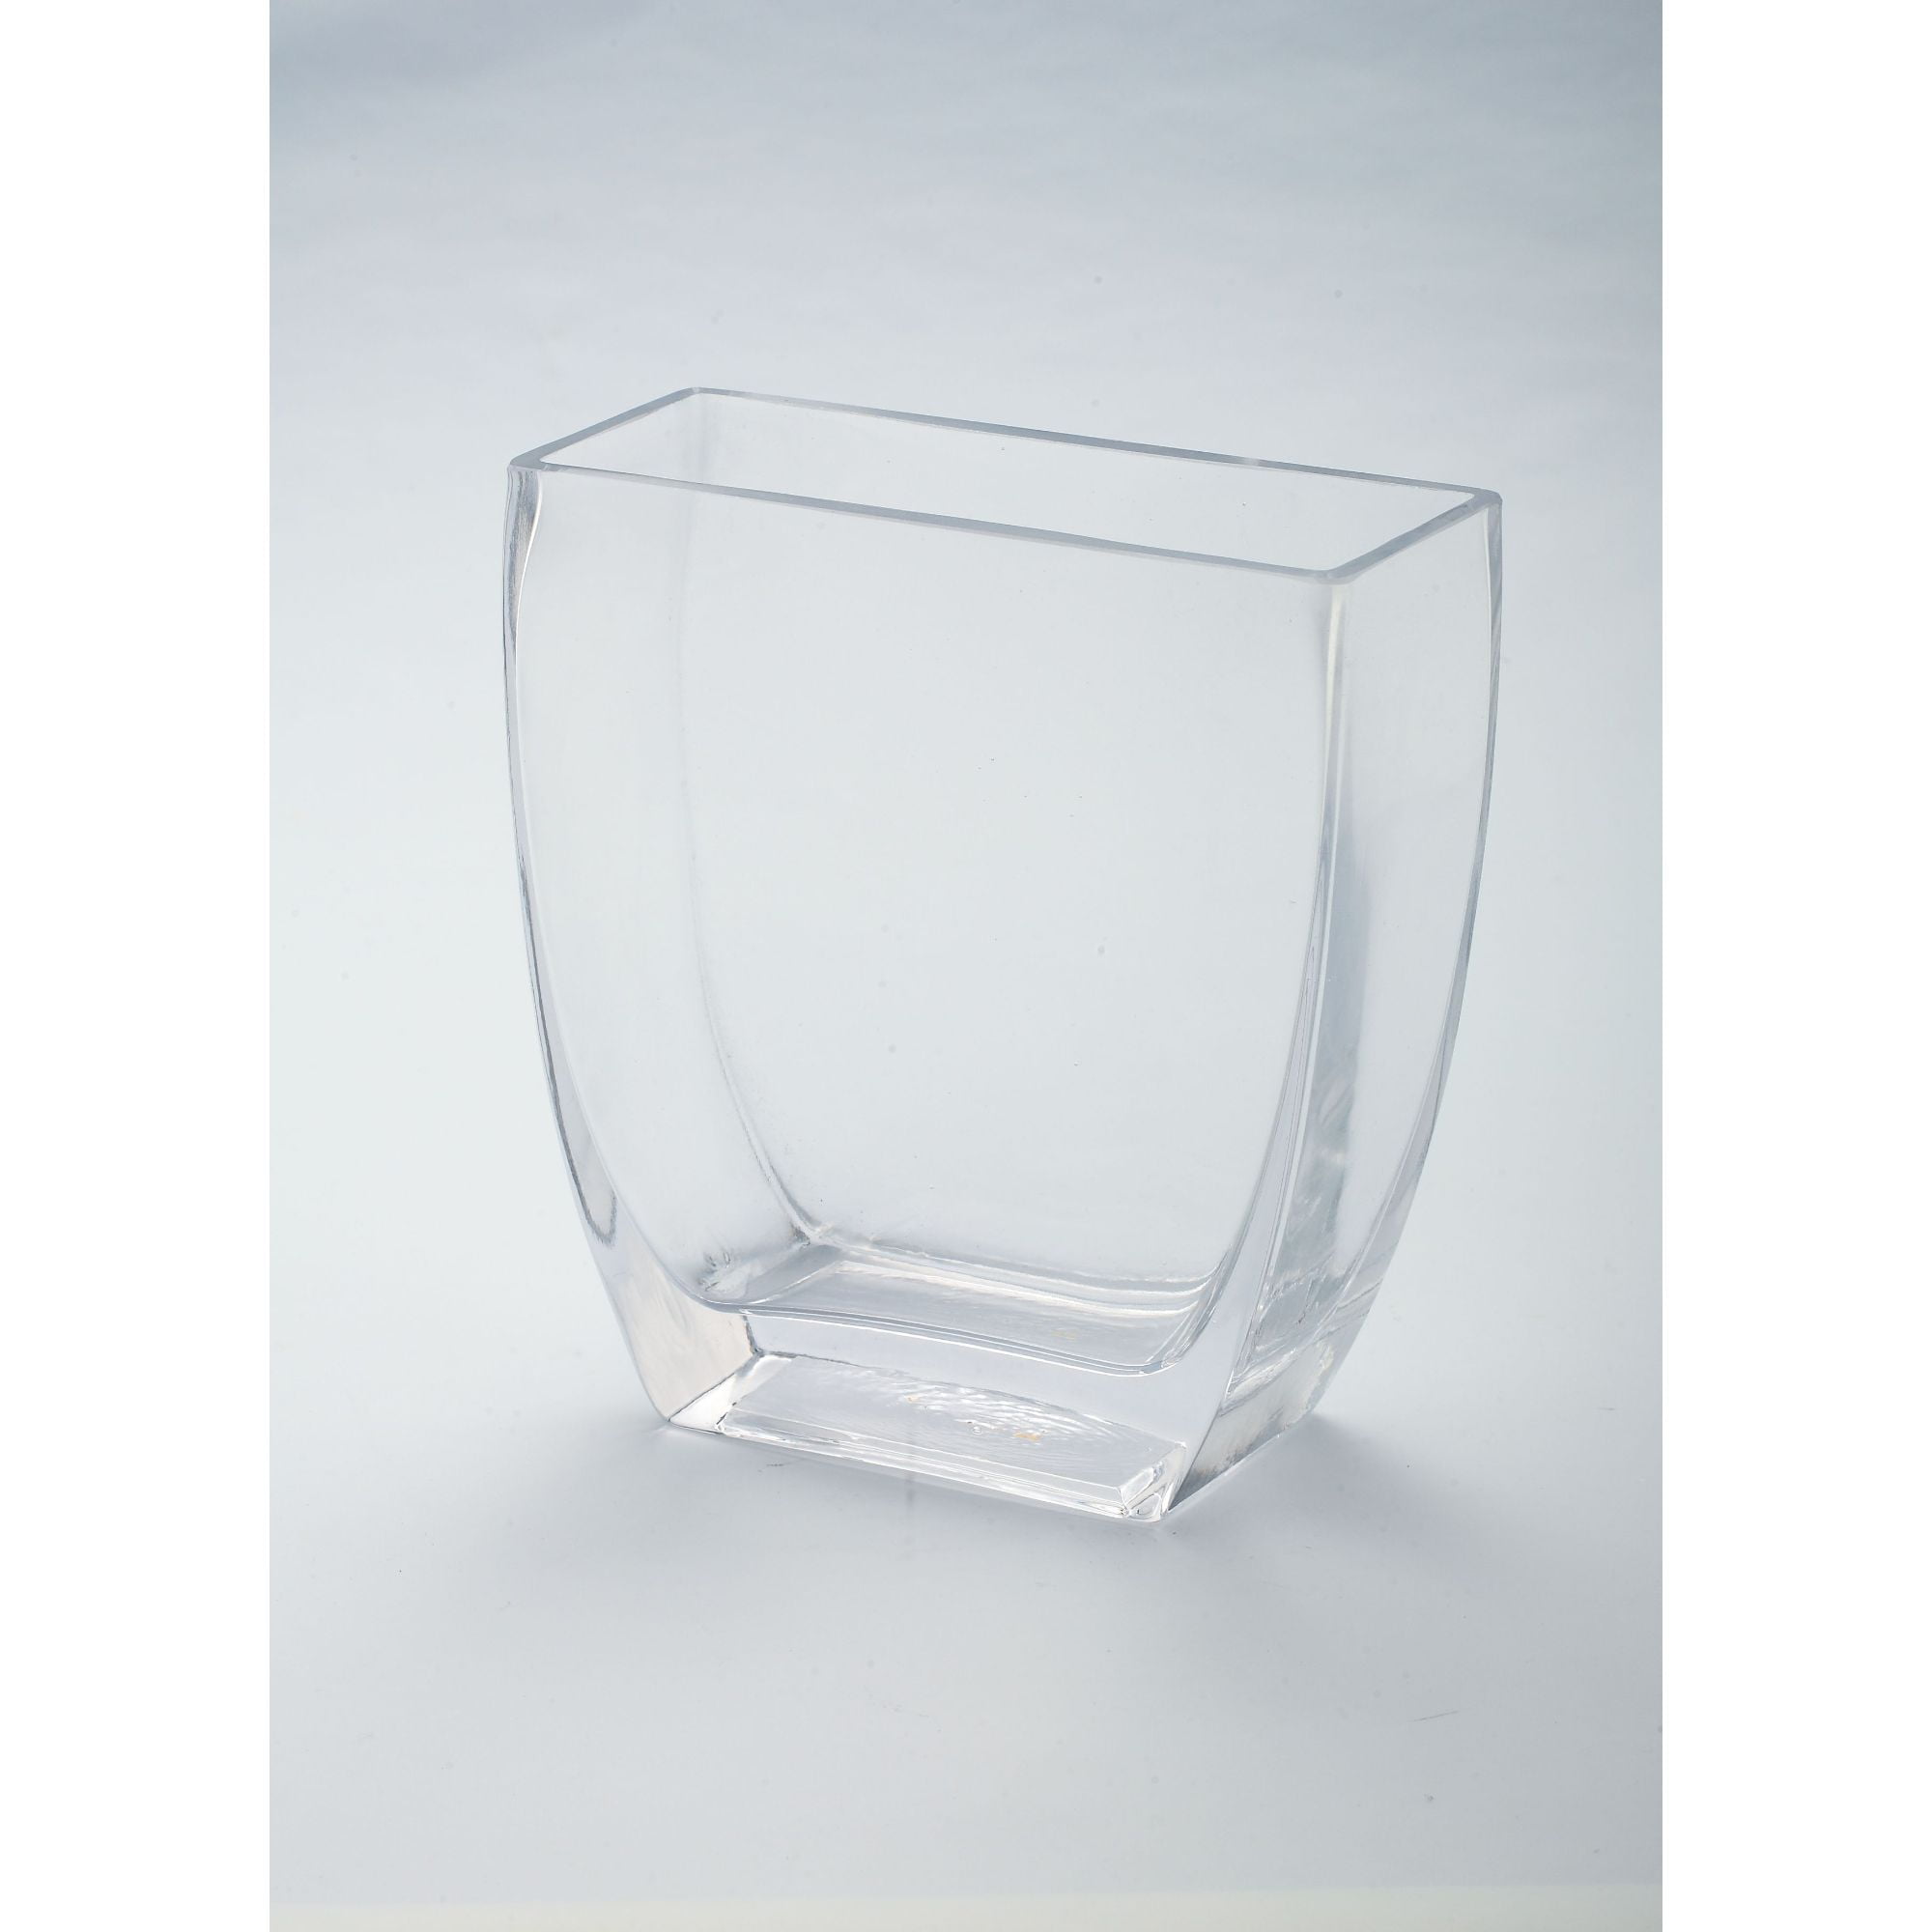 Clear Large Square Glass Vase Cube 8 Inch 8" x 8" x 8" Oversize Centerpiece 